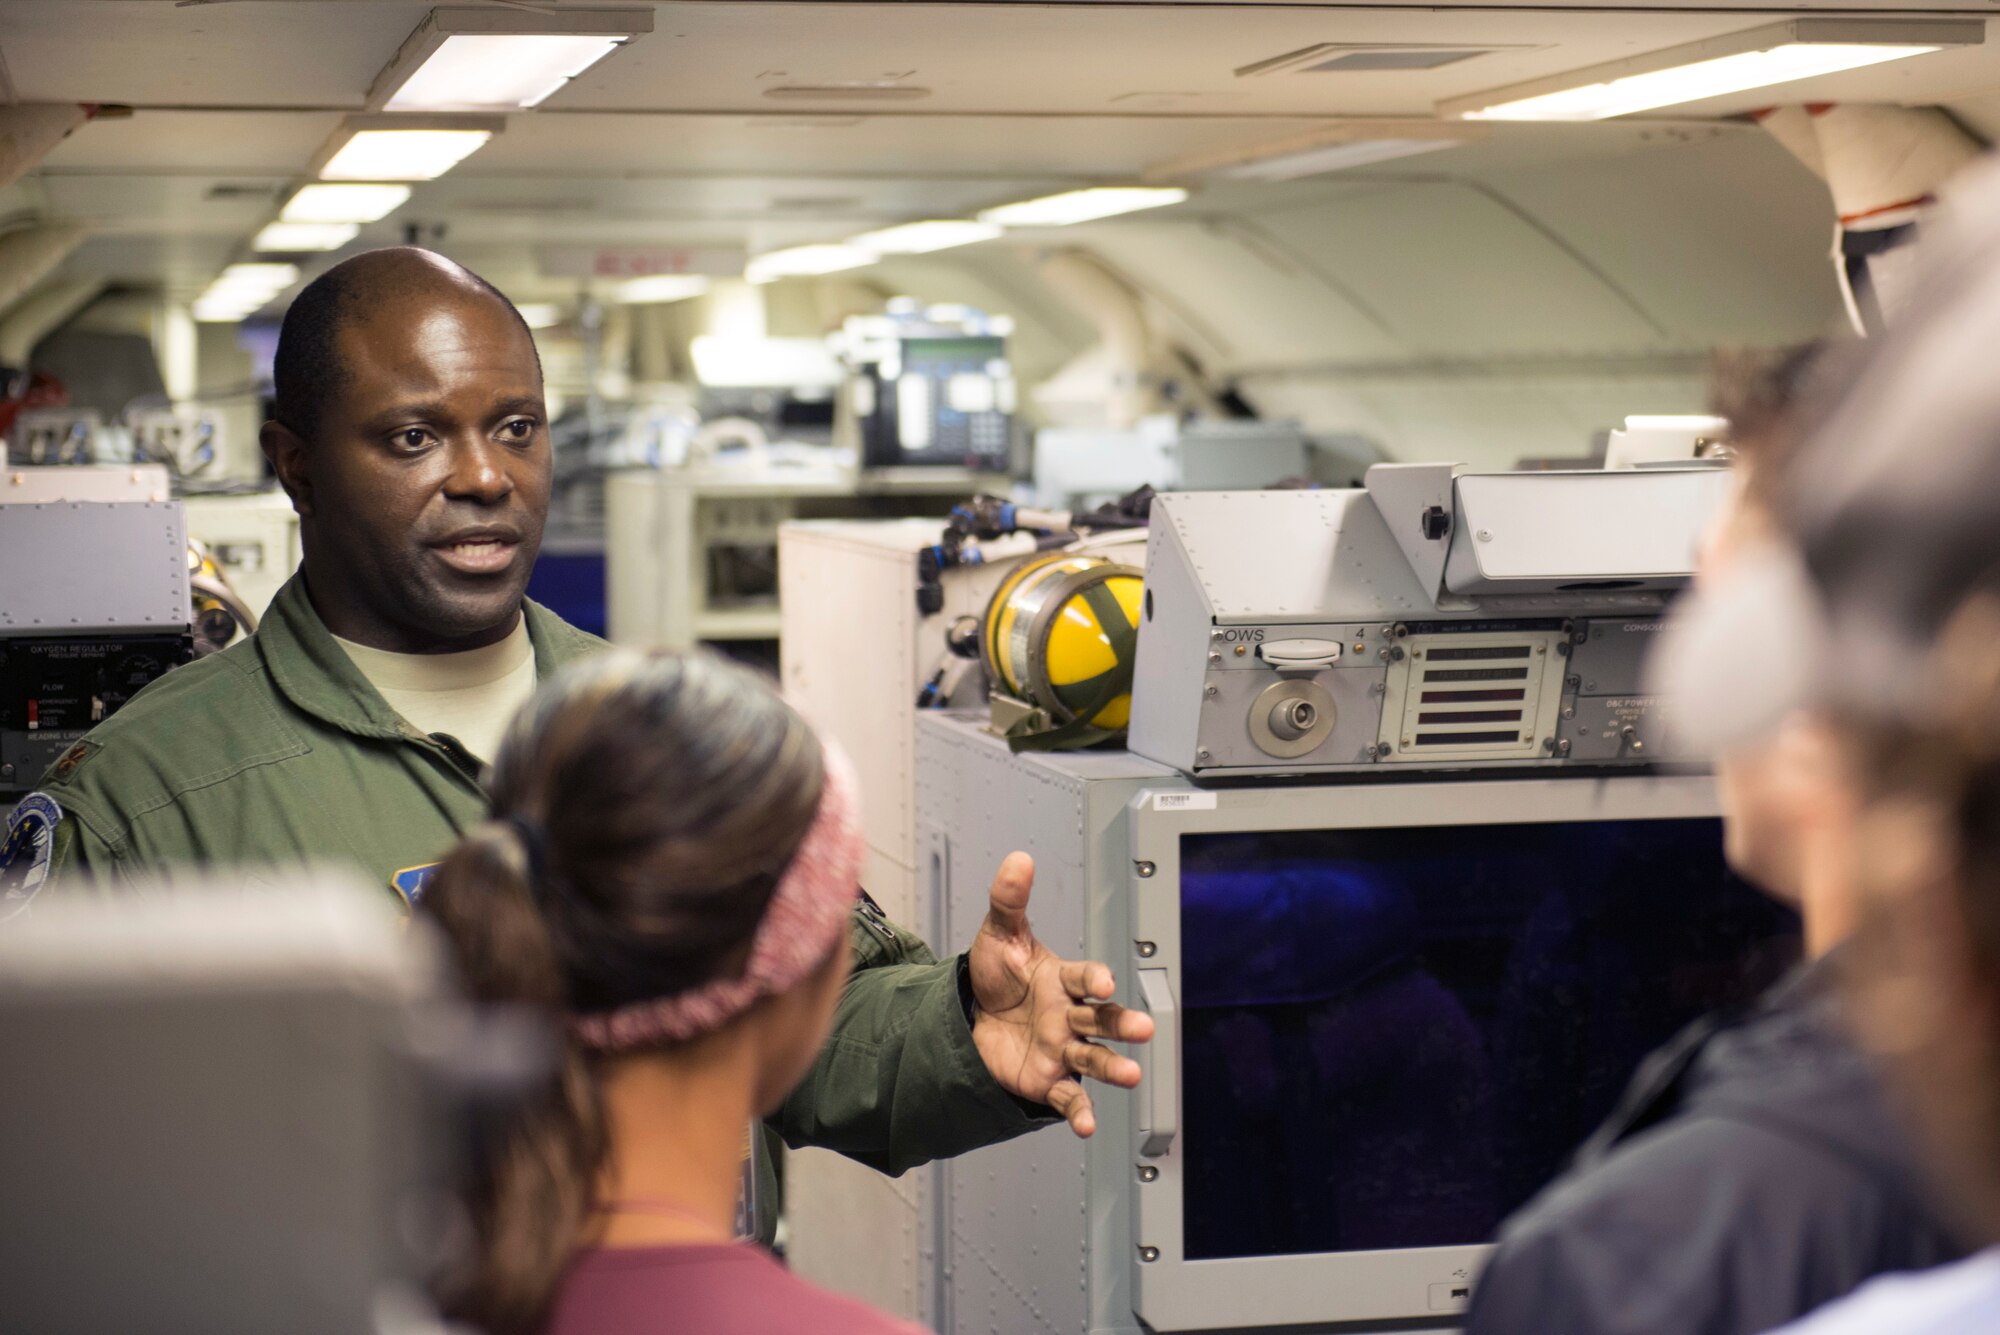 U.S. Air Force Maj. Wendell Noble, the assistant director of operations with the 116th Operations Support Squadron, Georgia Air National Guard, briefs Mercer University upperclassmen on an E-8C Joint STARS at Robins Air Force Base, Ga., Oct. 15, 2019. The students from the computer science department worked on an innovation project to help reform the way JSTARS scheduling is run, and a behind-the-scenes look explained some current operating procedures.